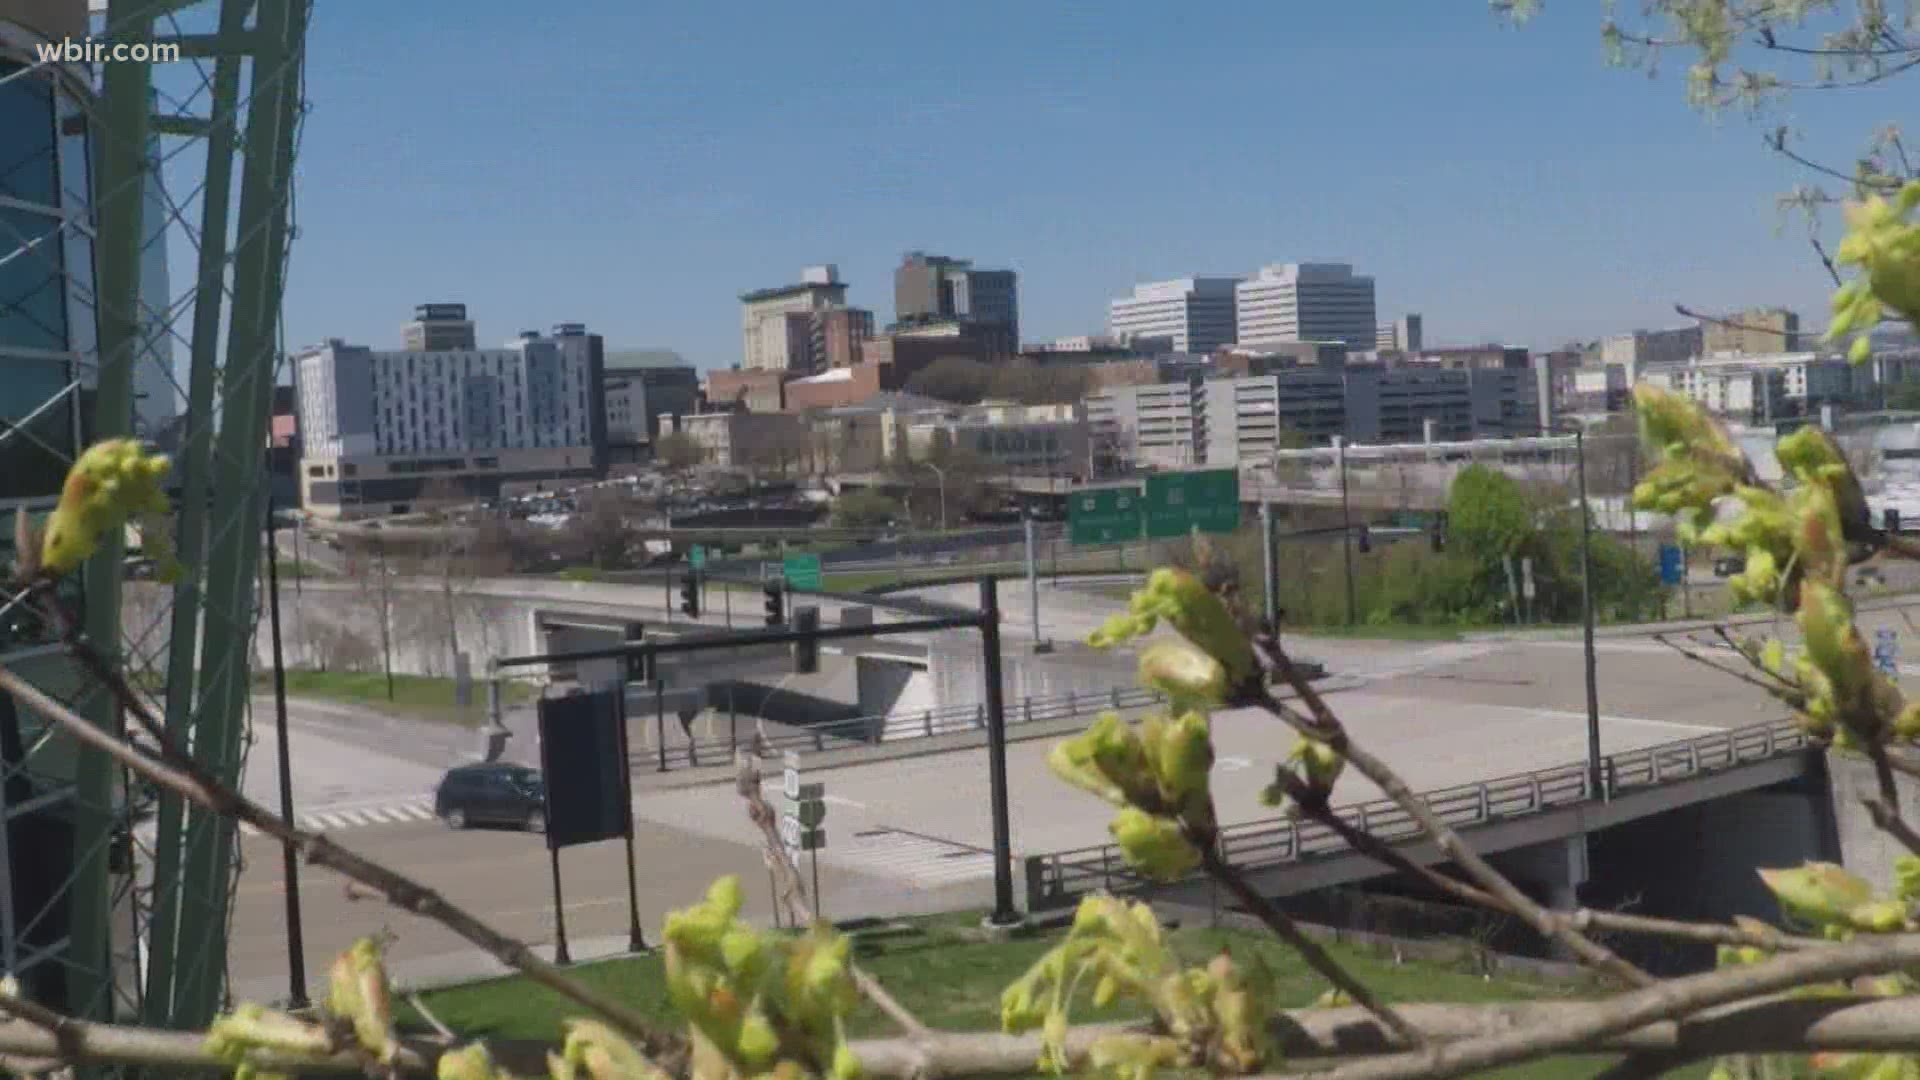 Visit Knoxville says the city's tourism numbers are skyrocketing after hitting record lows.